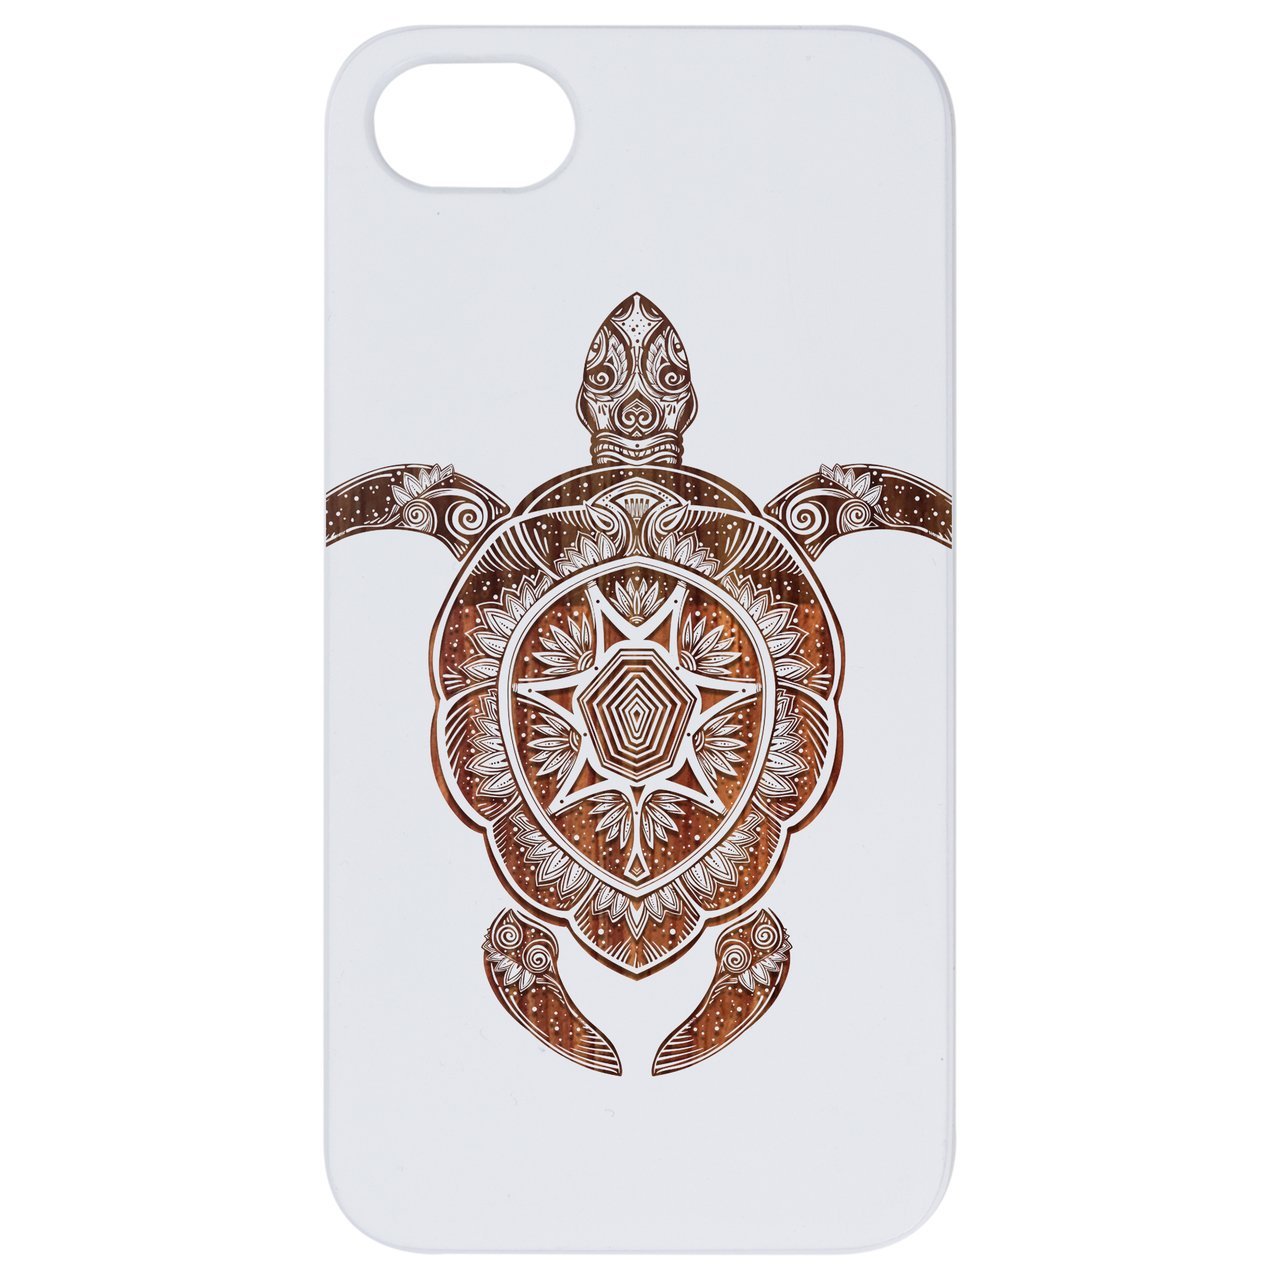 Engraved Ornate Turtle Wooden Cell Phone Case - Saltwater Bodega